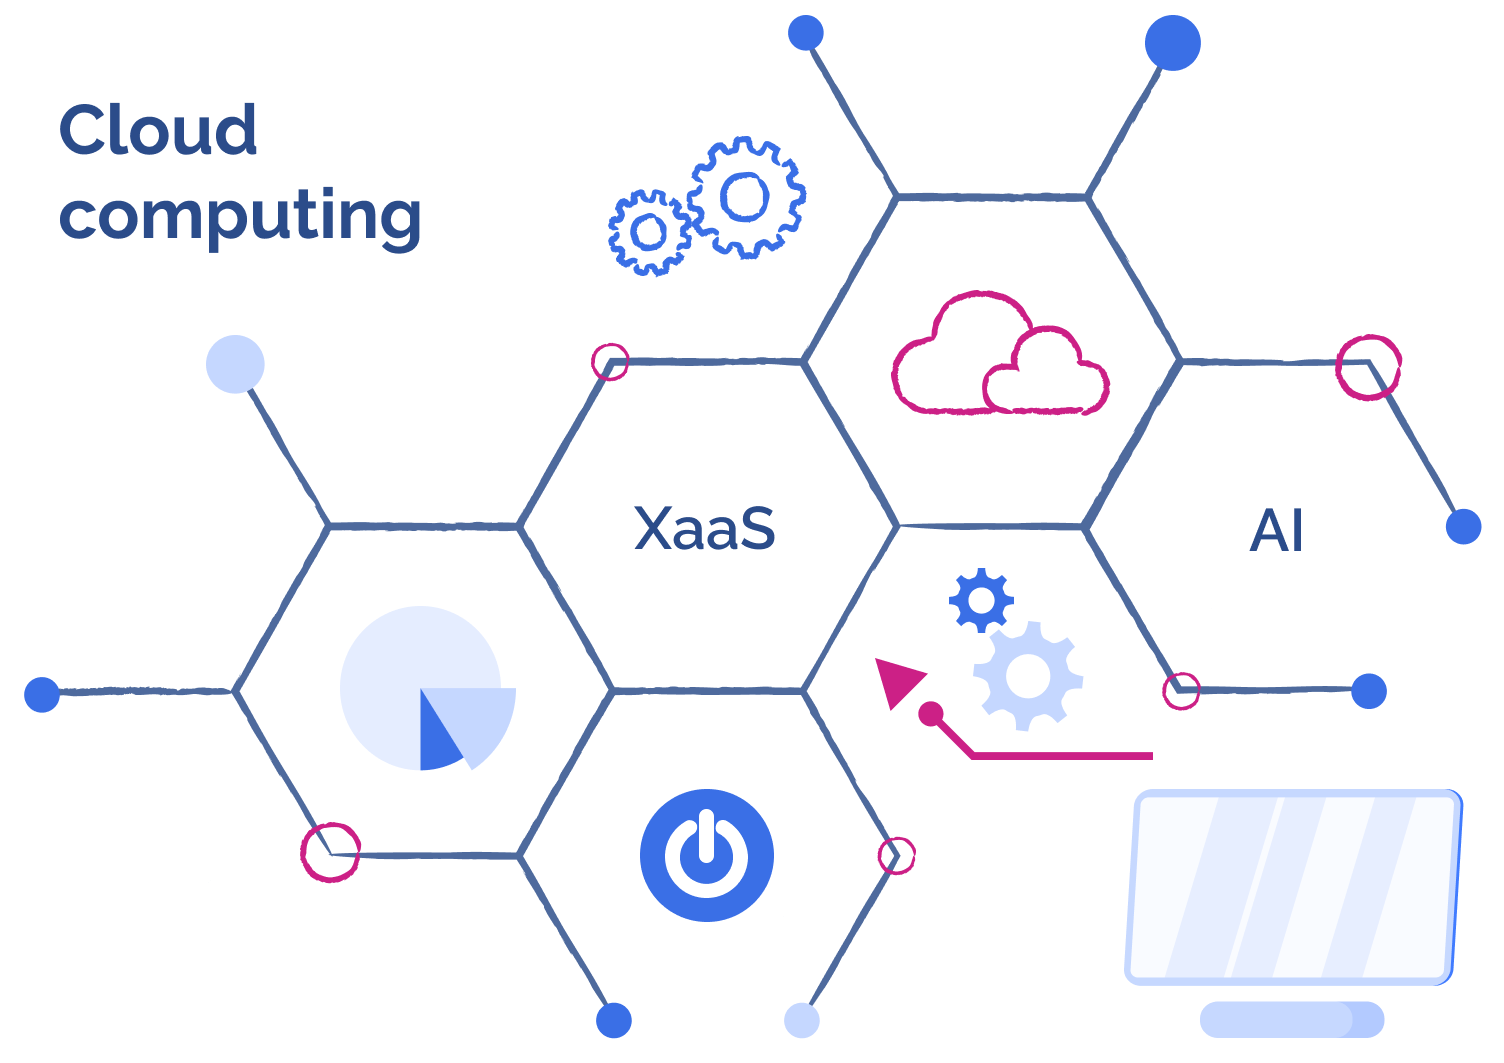 Illustration displaying elements related to cloud computing including XaaS, AI, analytics, and devices.